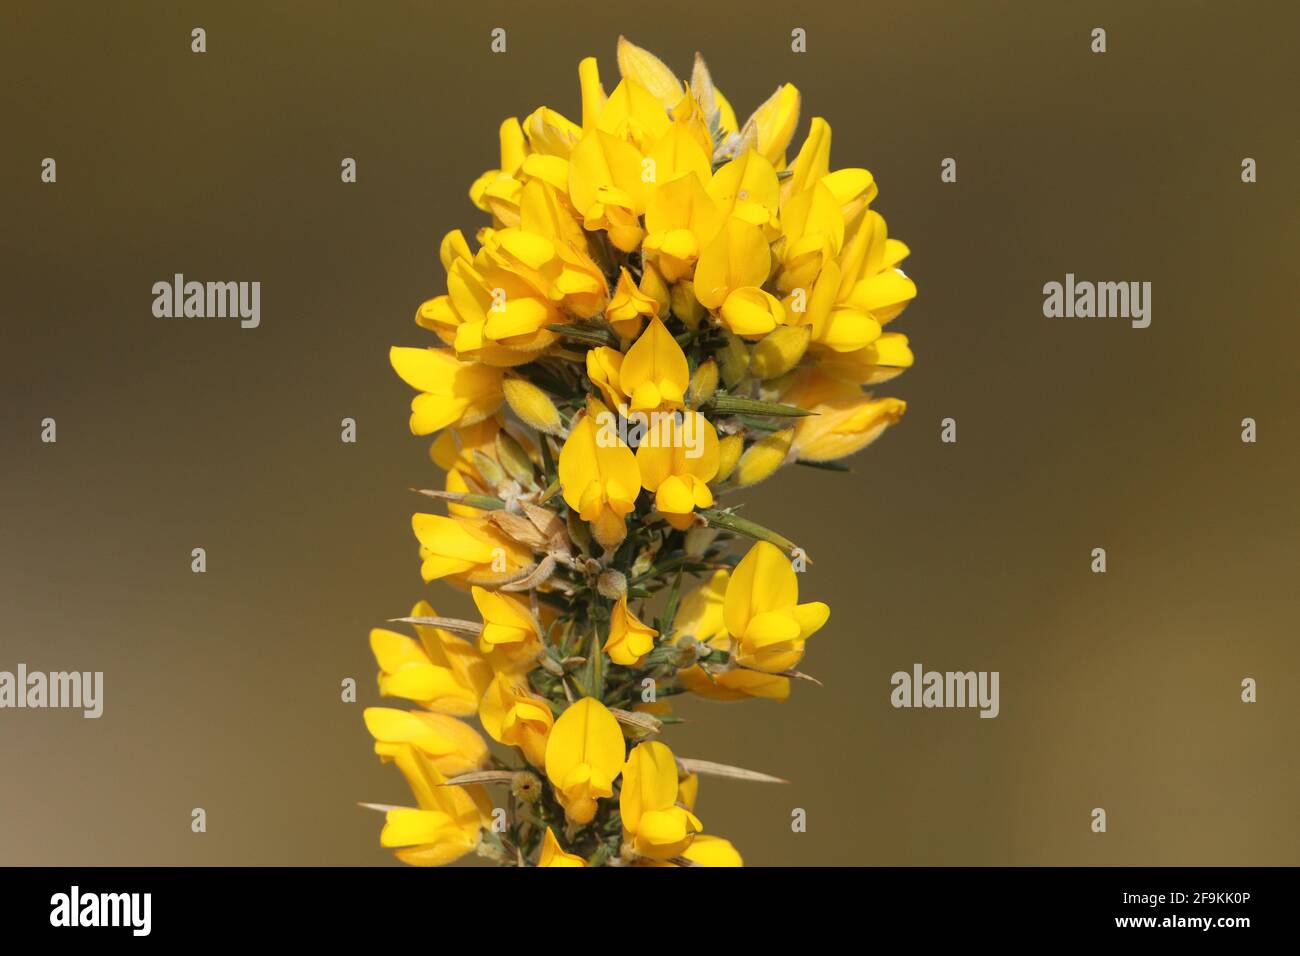 The flowers of a Common Gorse, Ulex europaeus, growing in heathland. Stock Photo